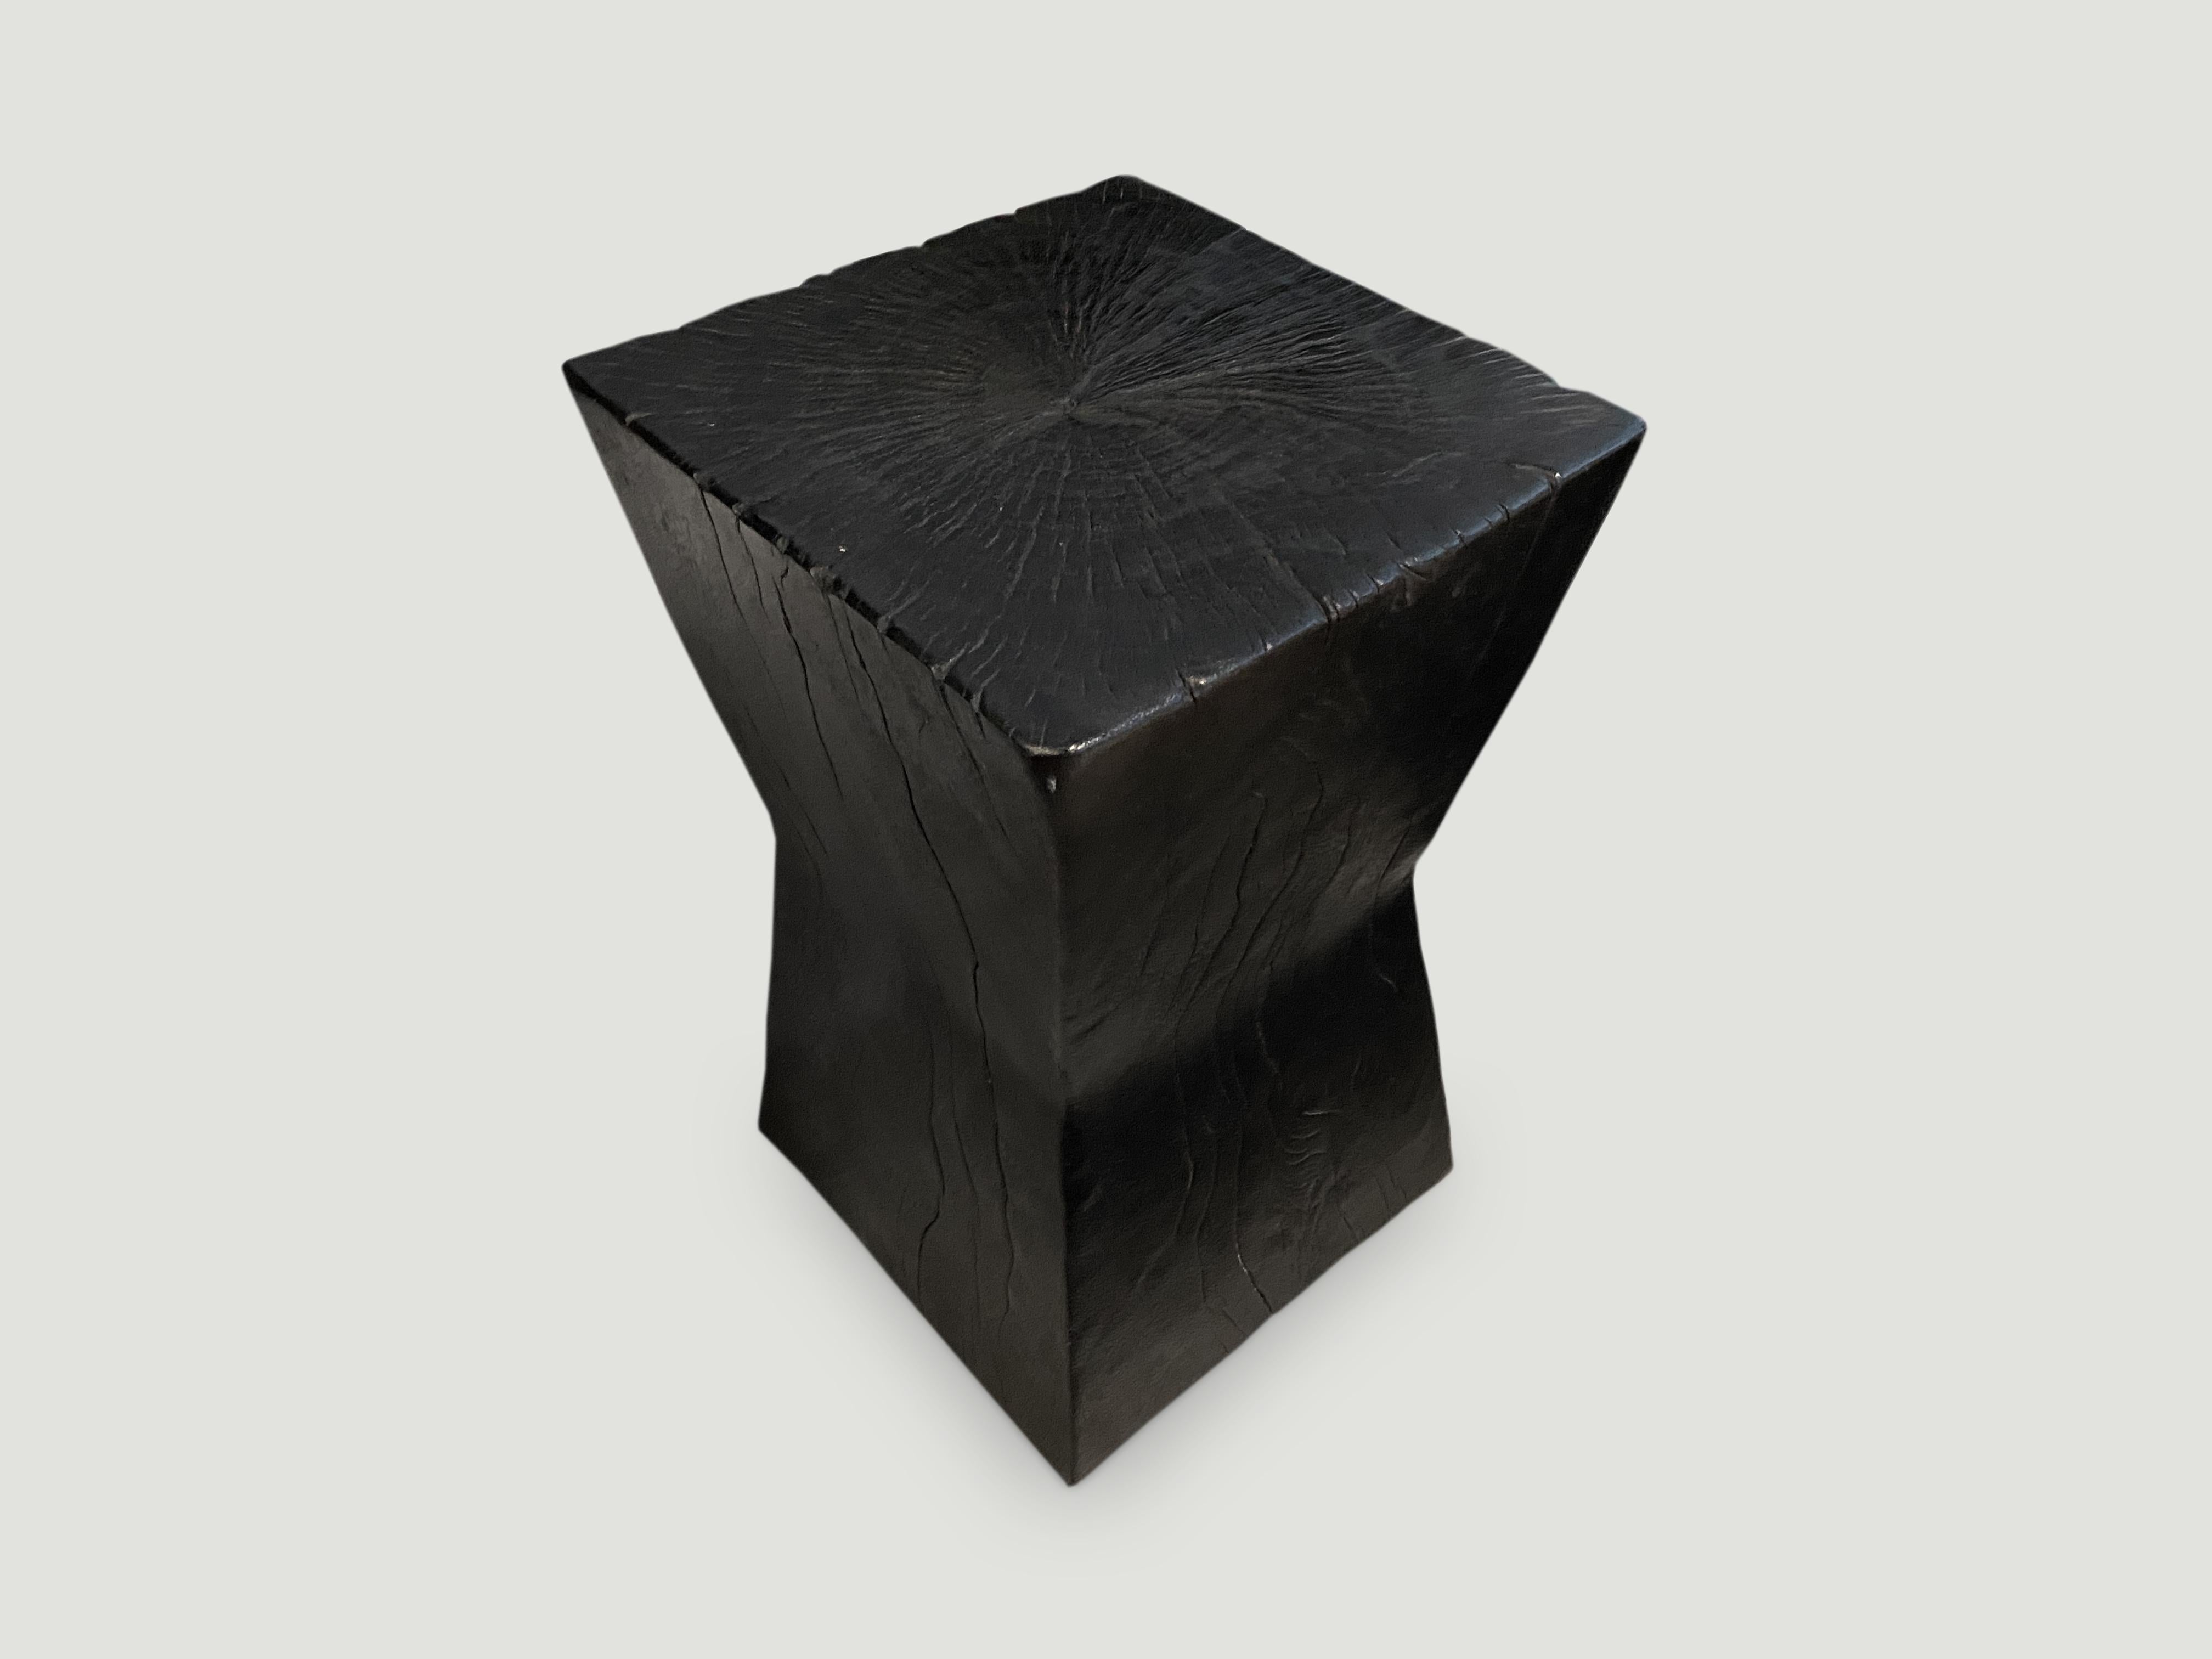 Reclaimed hourglass shaped tamarind wood side table. Hand carved whilst respecting the natural organic wood. Burnt, sanded and sealed. We have a collection. The price and size reflect the one shown. 

The Triple Burnt collection represents a